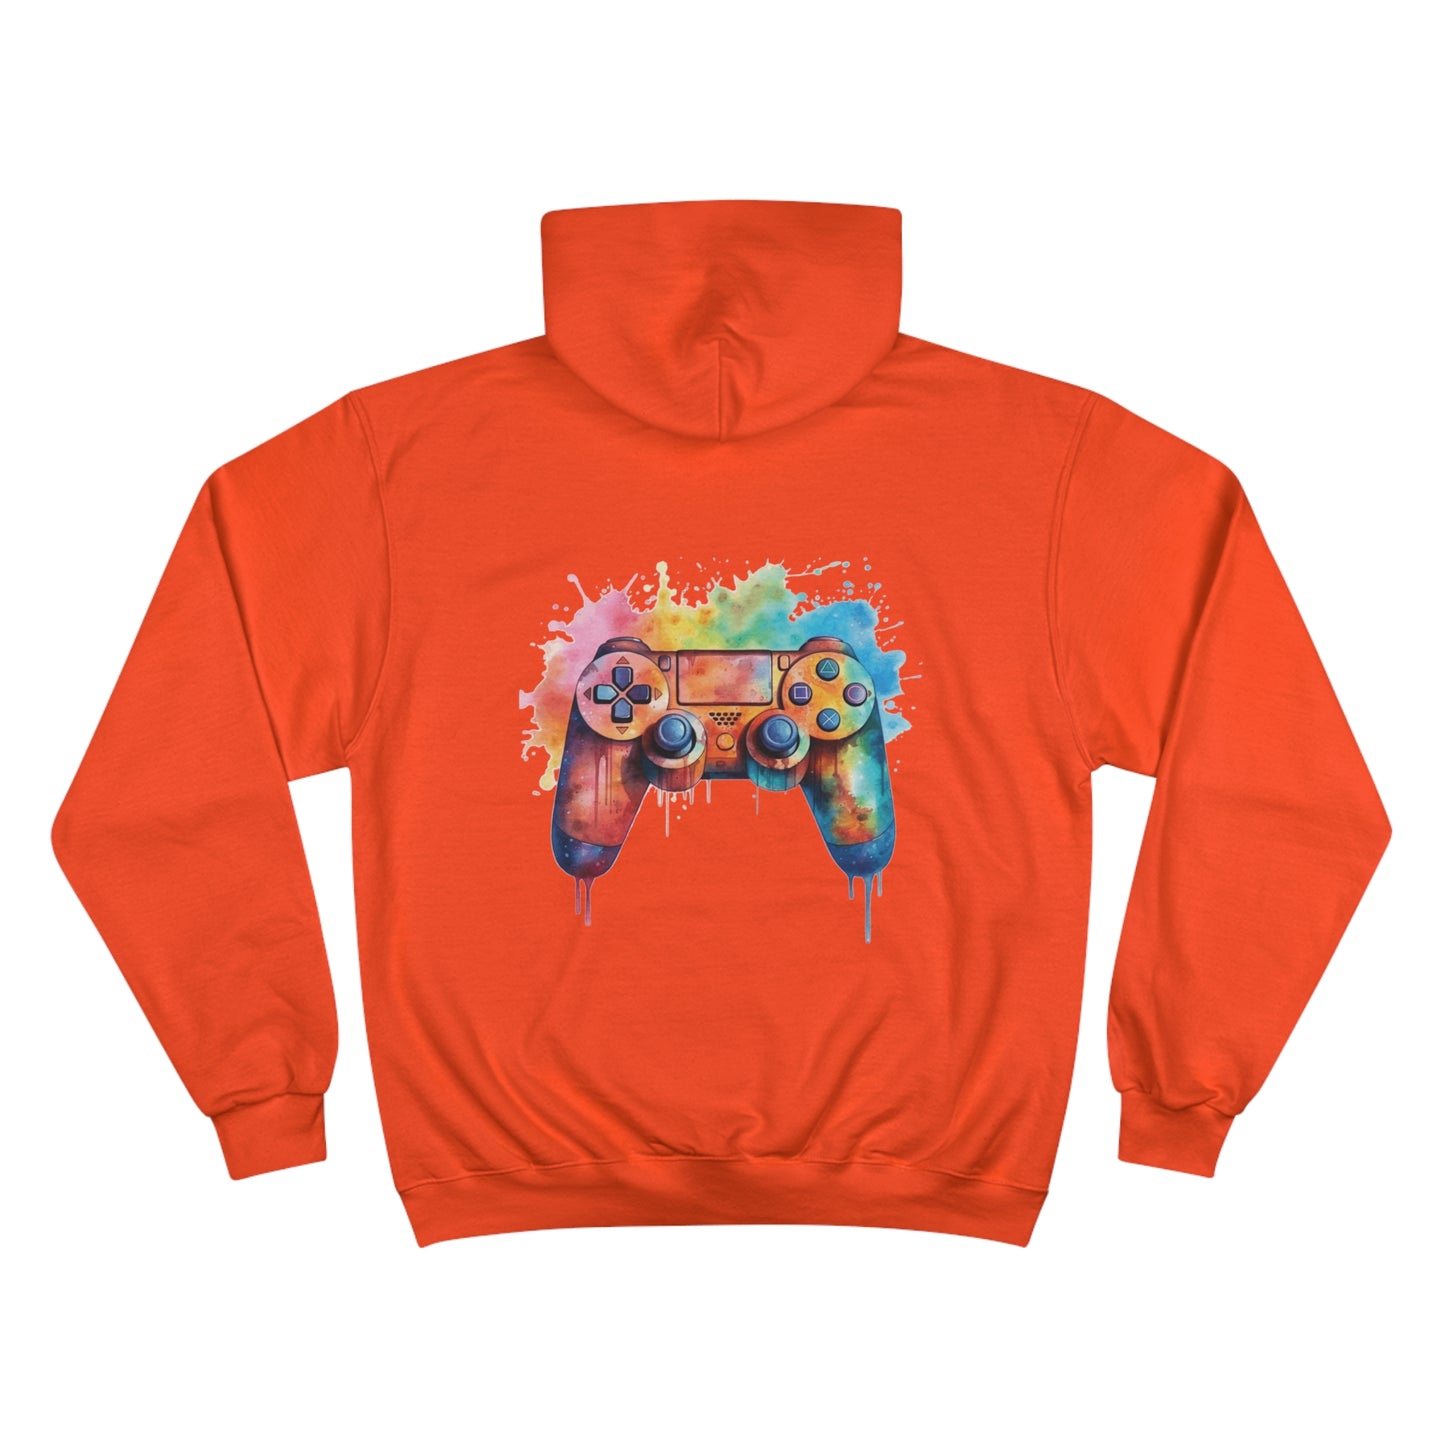 Game On, Chill Out Champion Hoodie